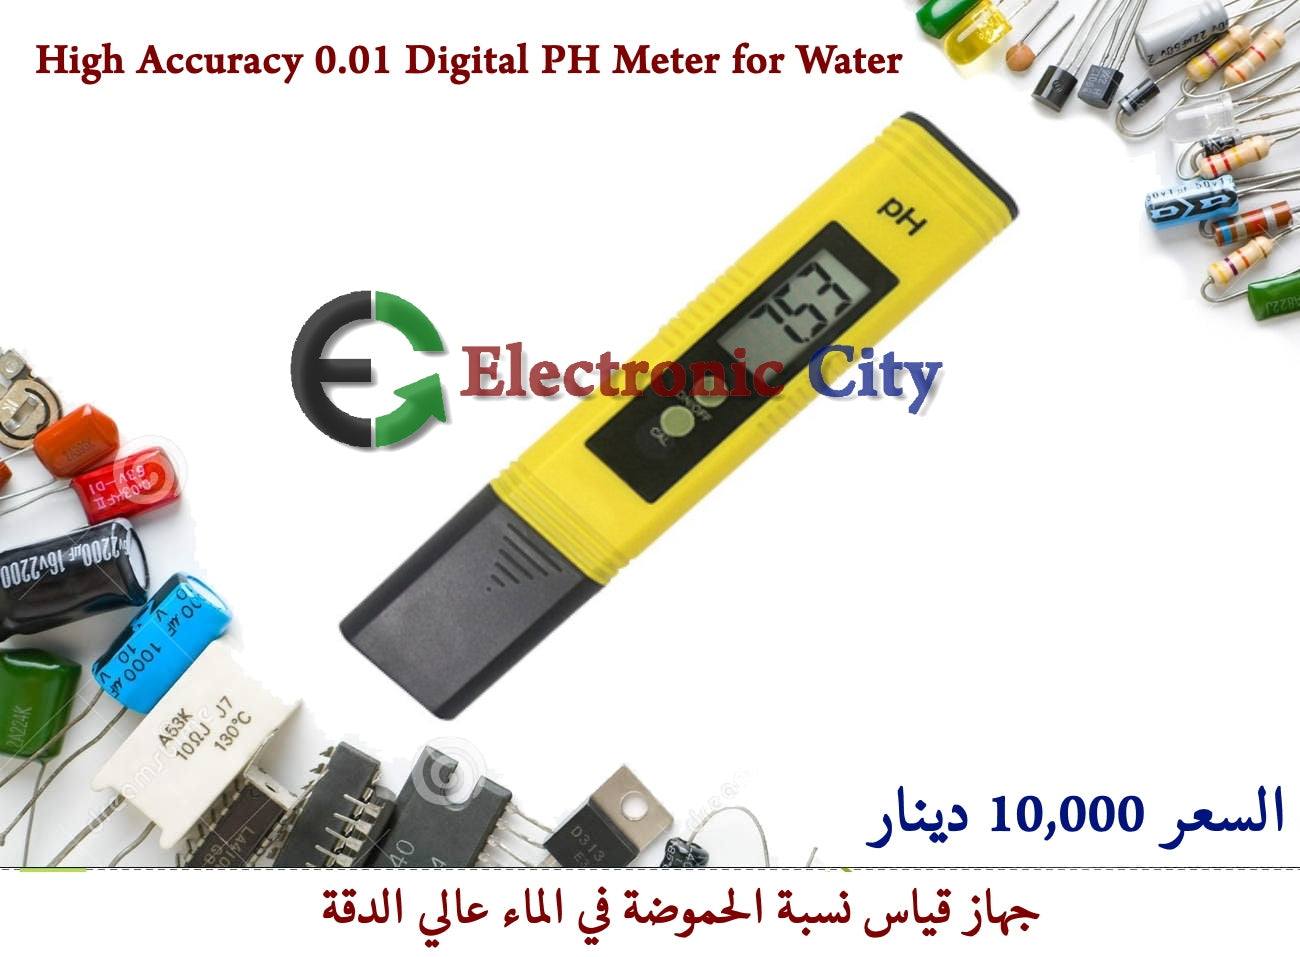 High Accuracy 0.01 Digital PH Meter for Water #L4 051081